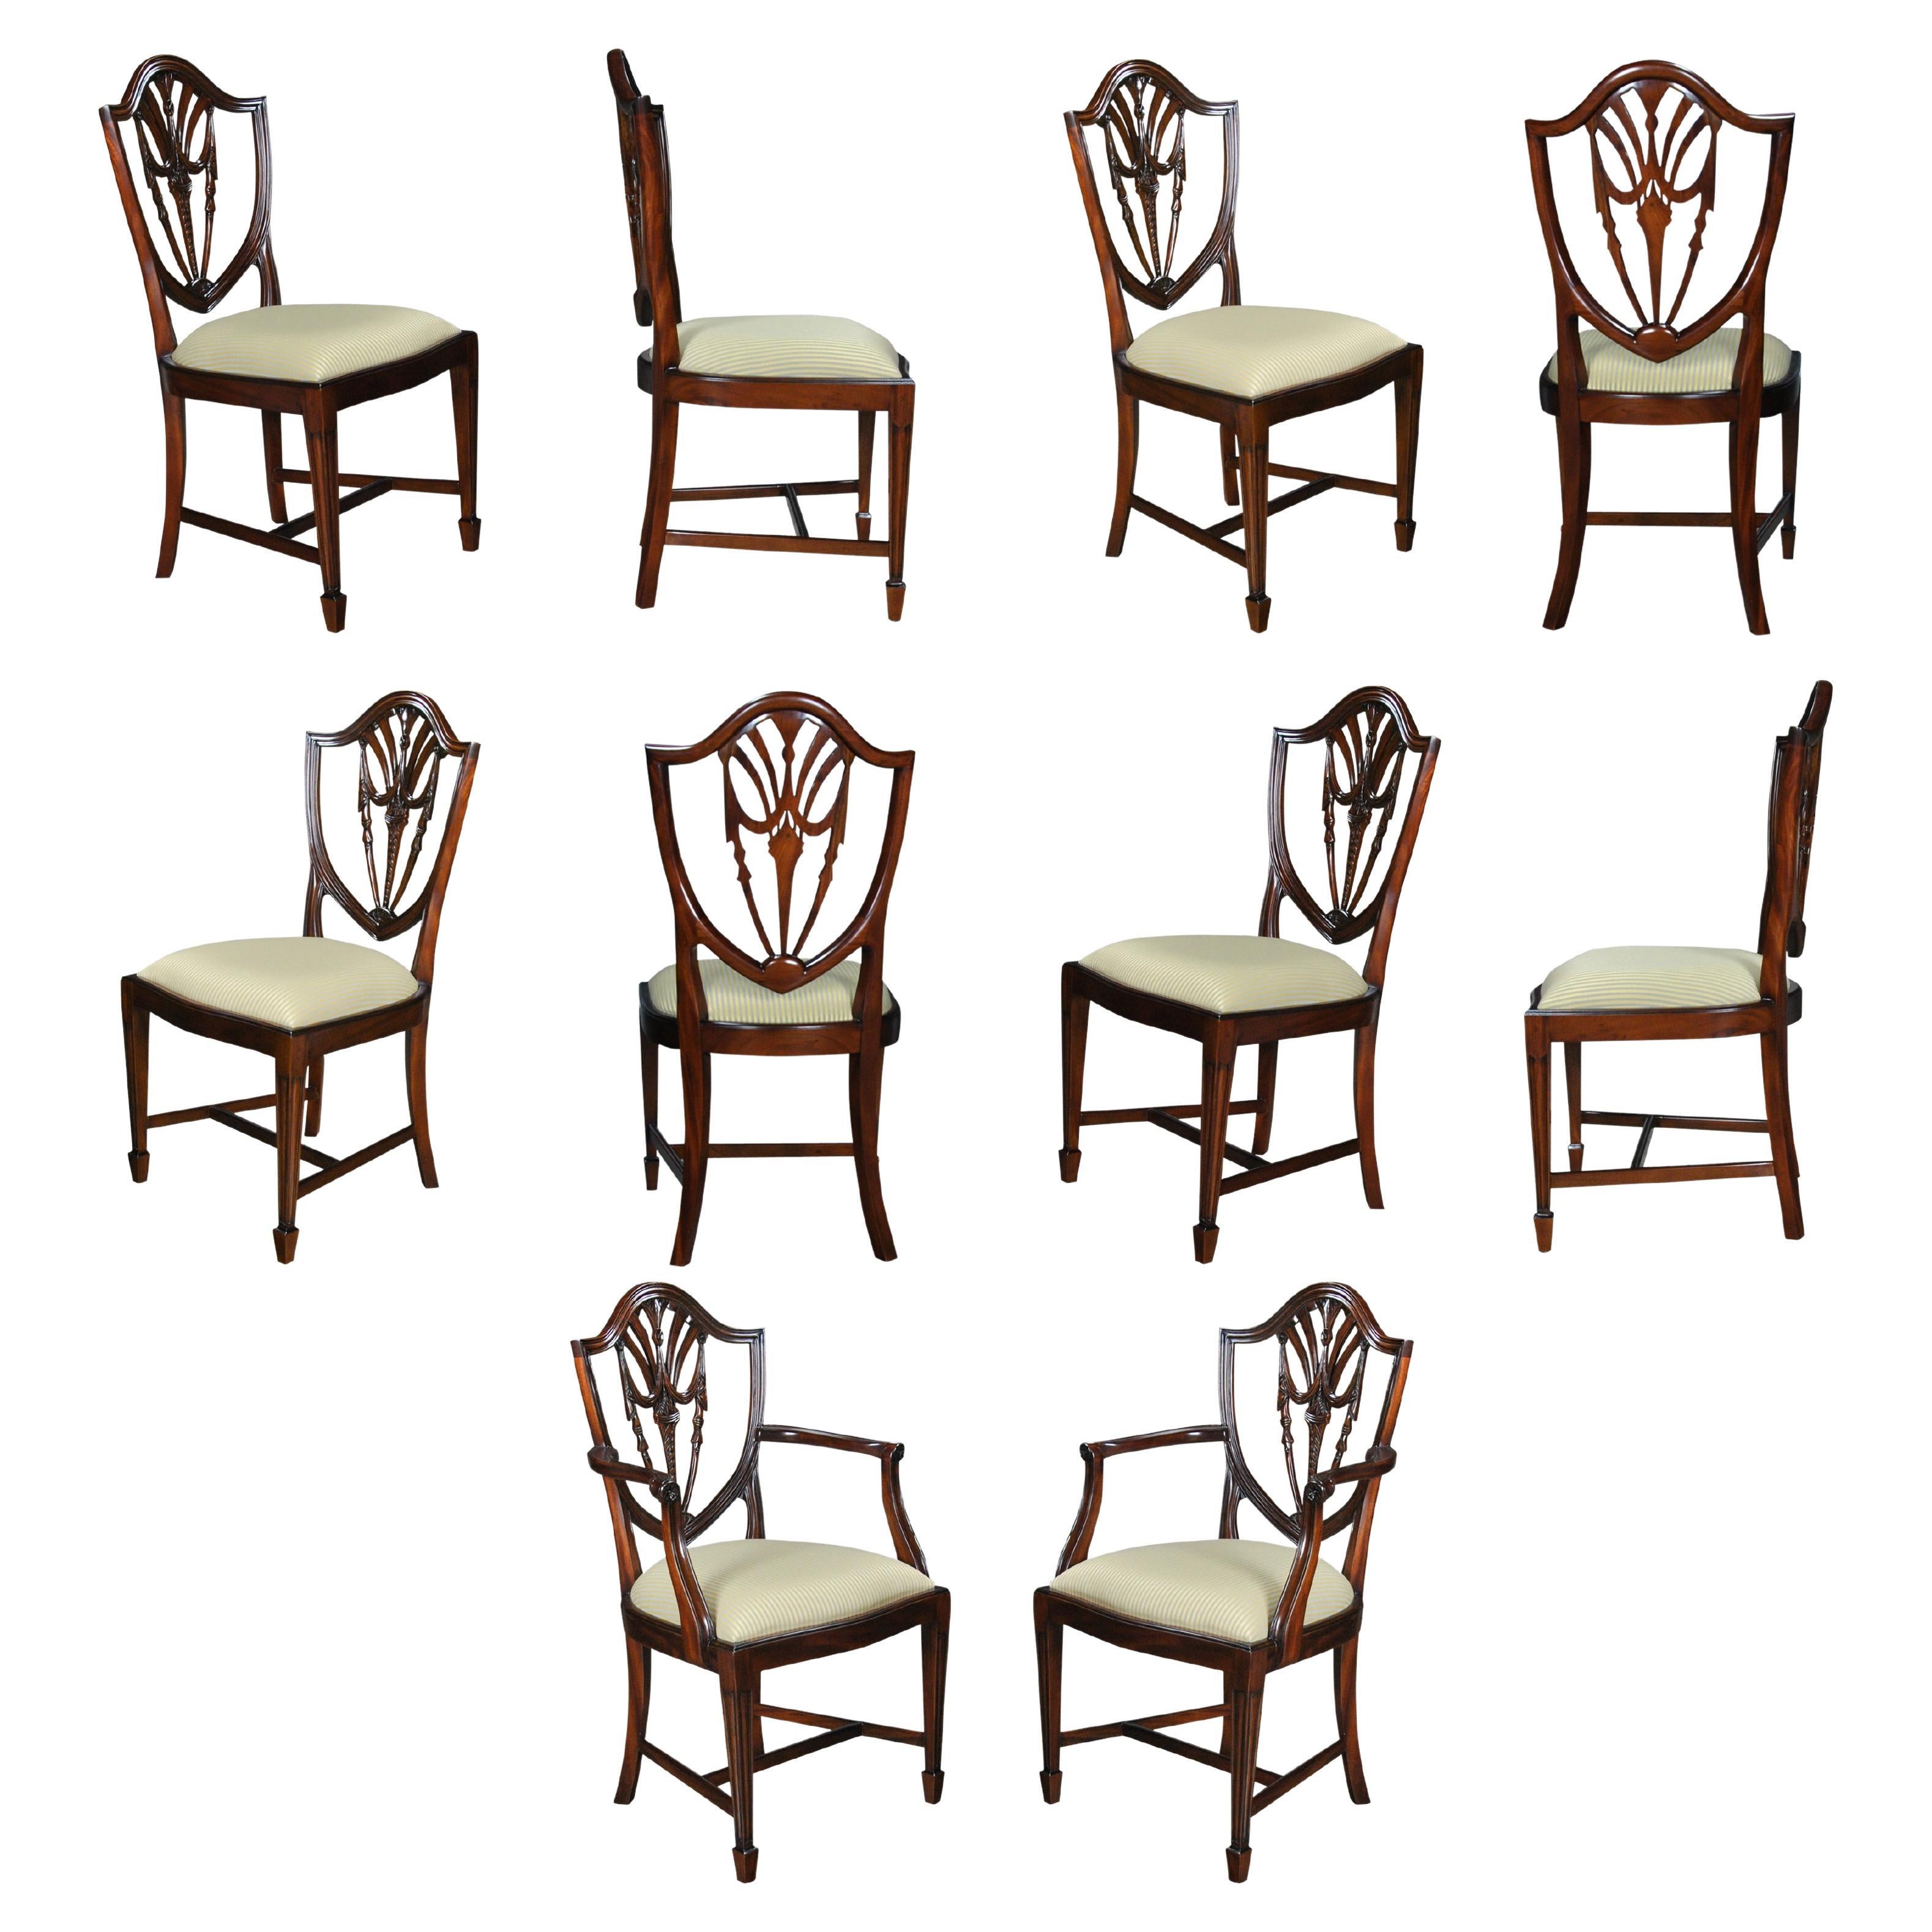 Drape Carved Shield Back Chairs, Set of 10 